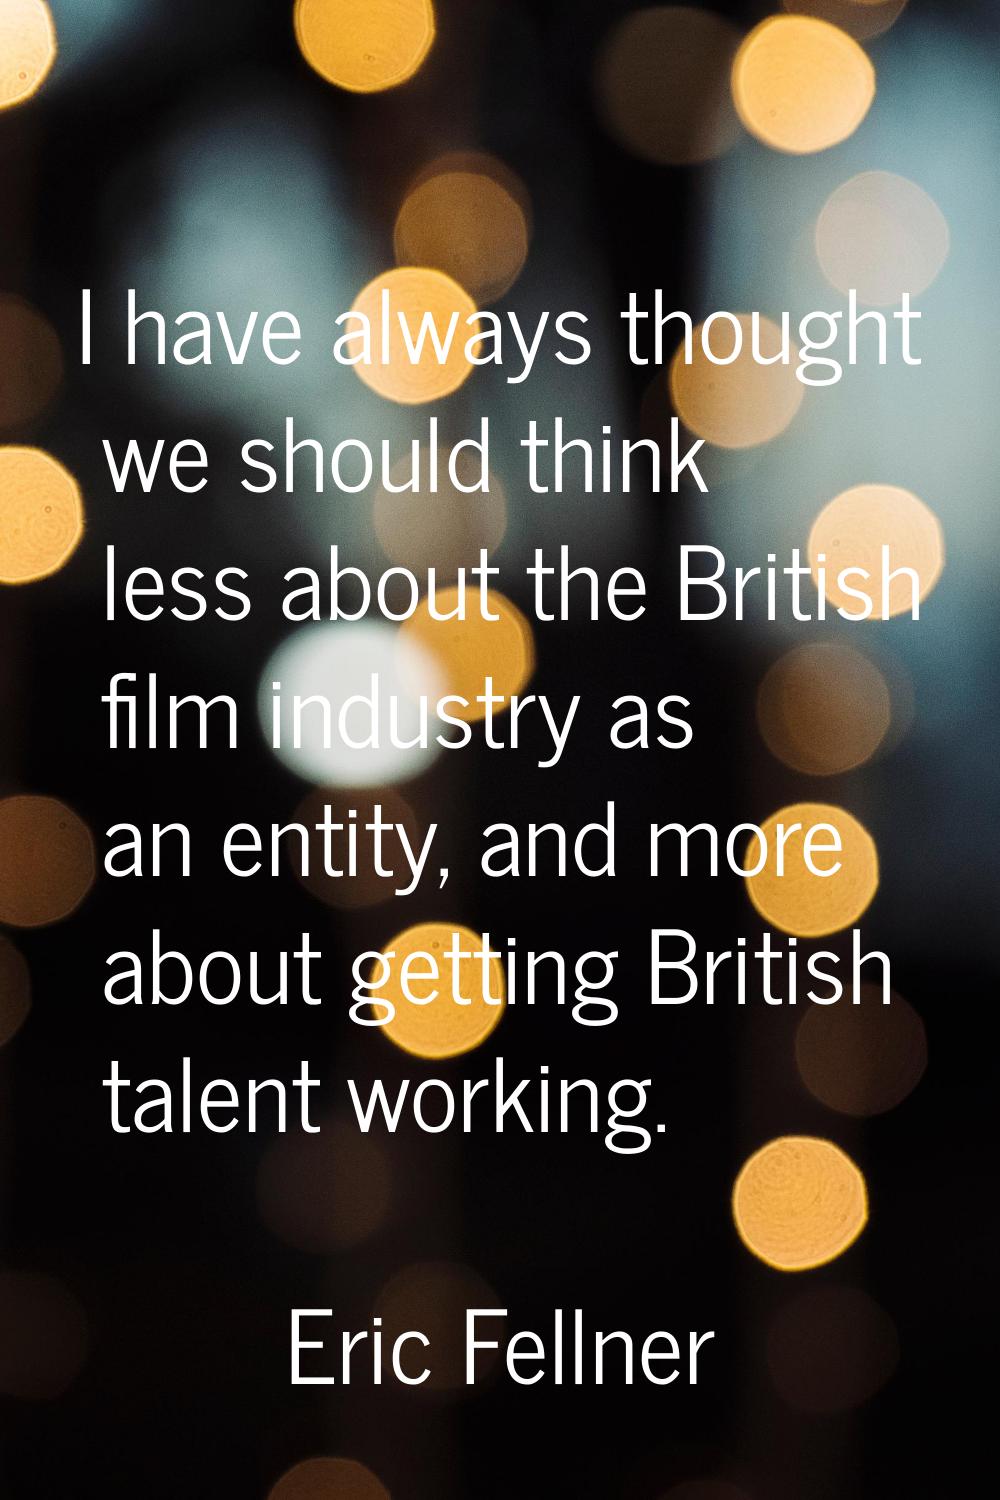 I have always thought we should think less about the British film industry as an entity, and more a